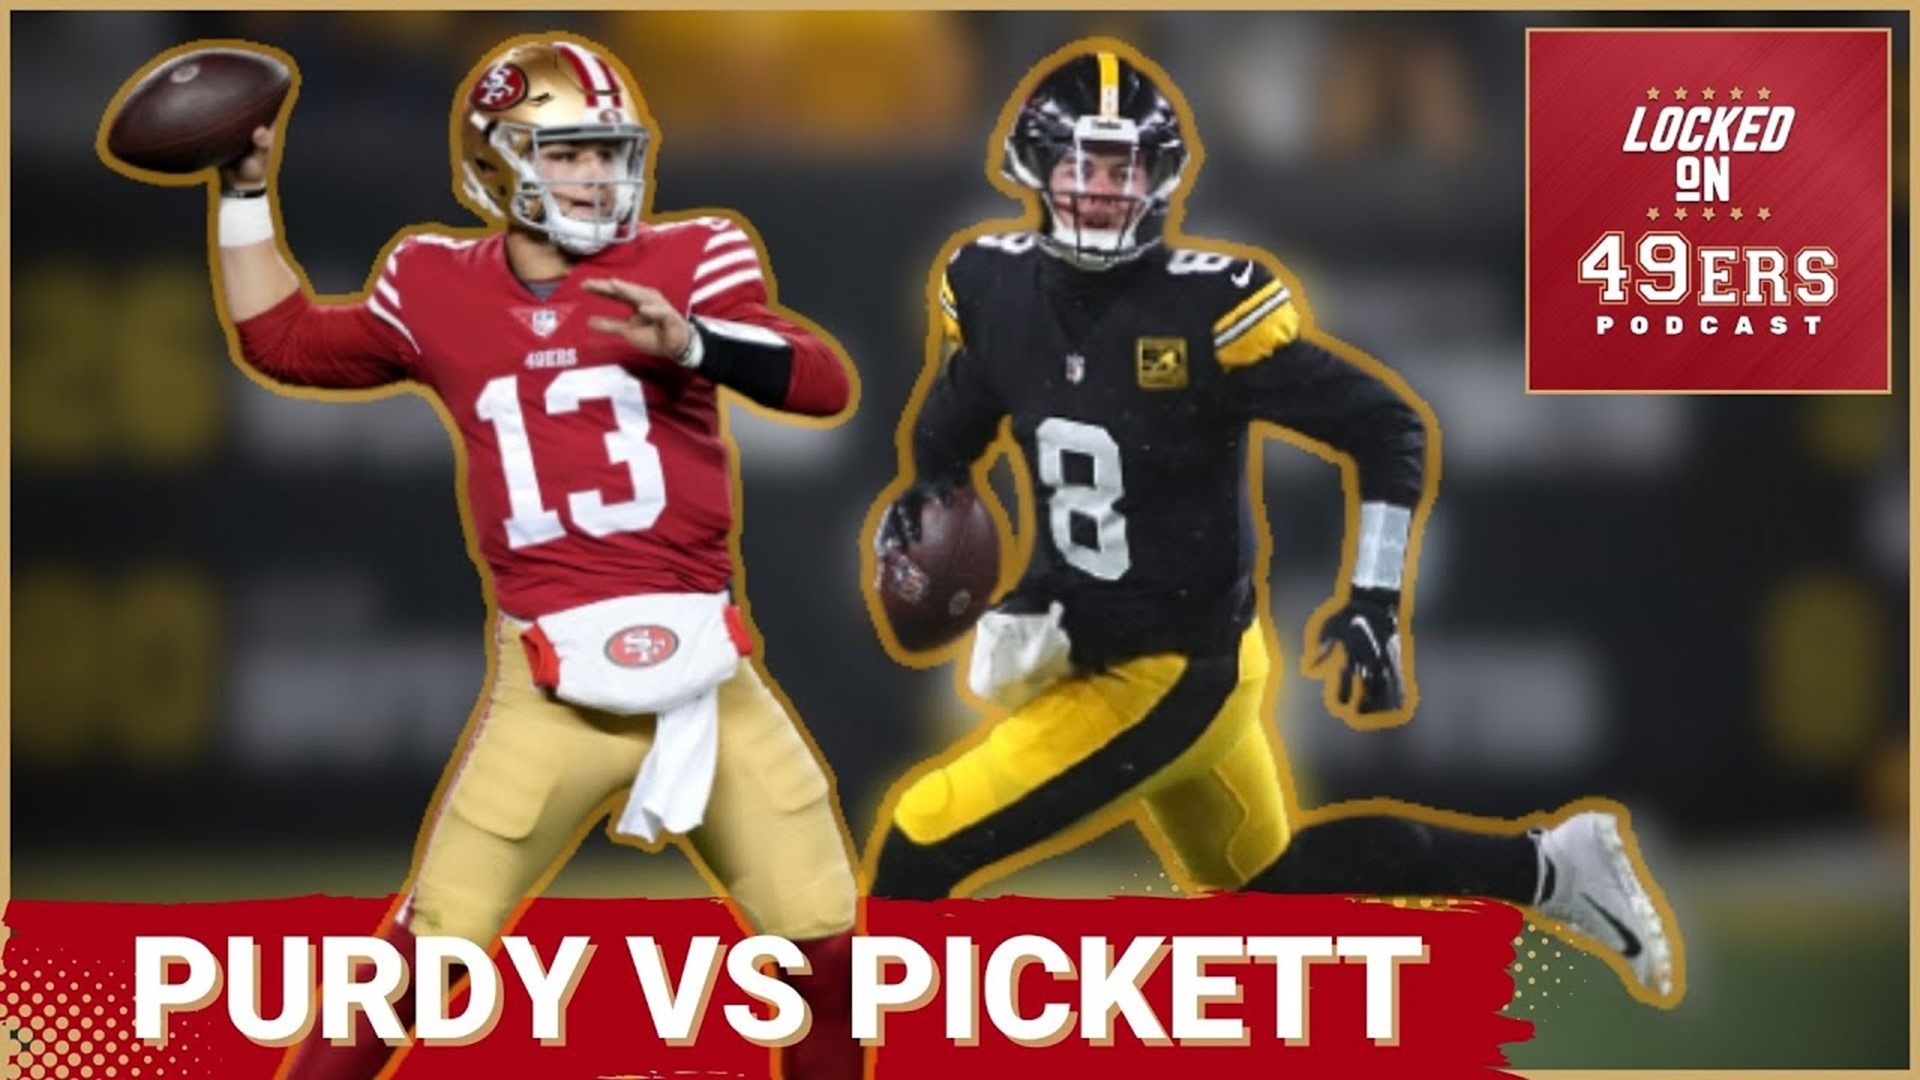 How long of a leash will Brock Purdy, Trey Lance or Sam Darnold have to start the San Francisco 49ers season?